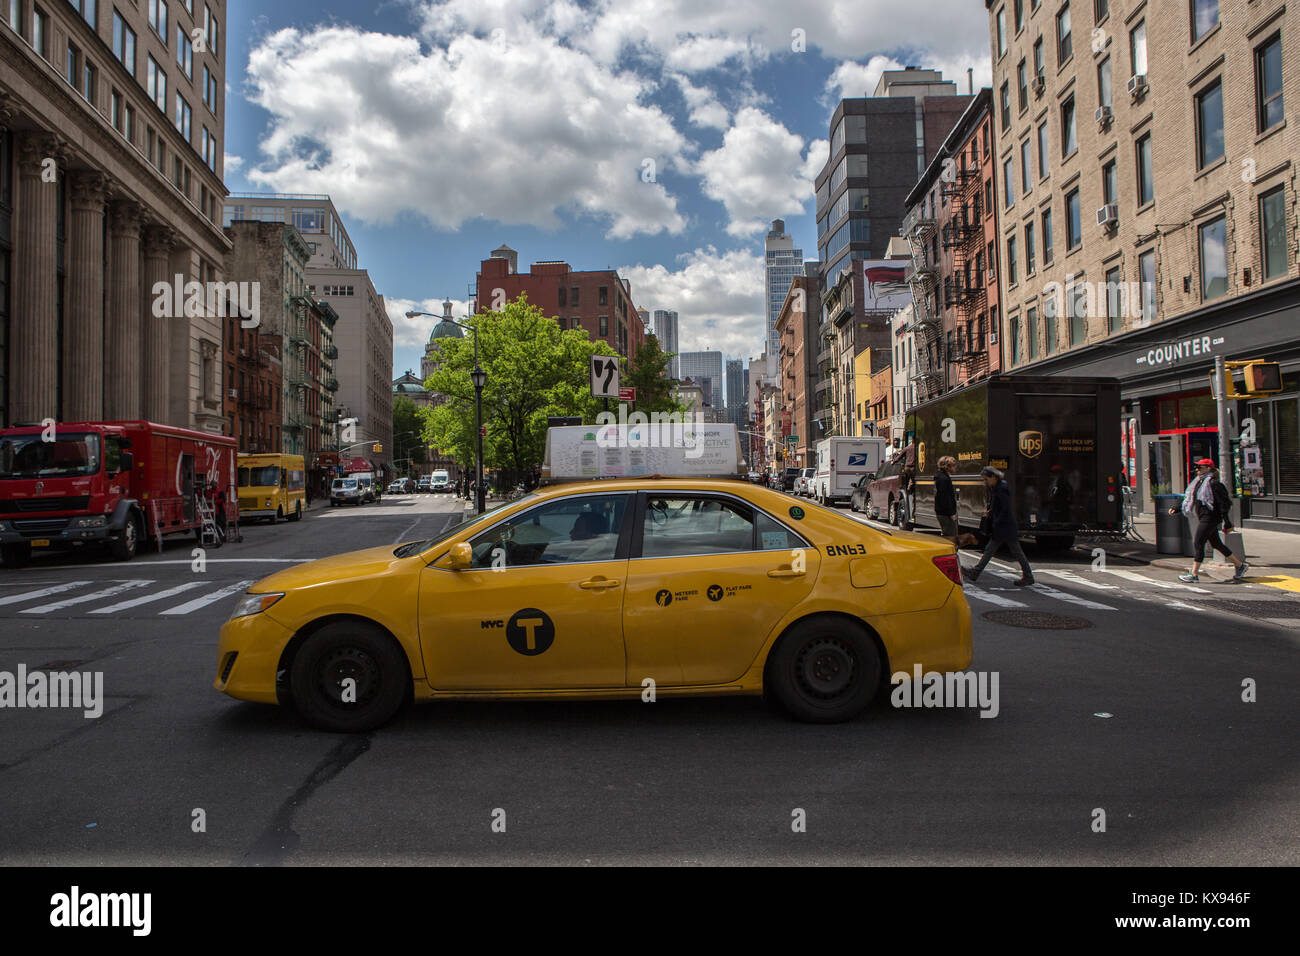 A yellow cab in Chelsea, NY Stock Photo